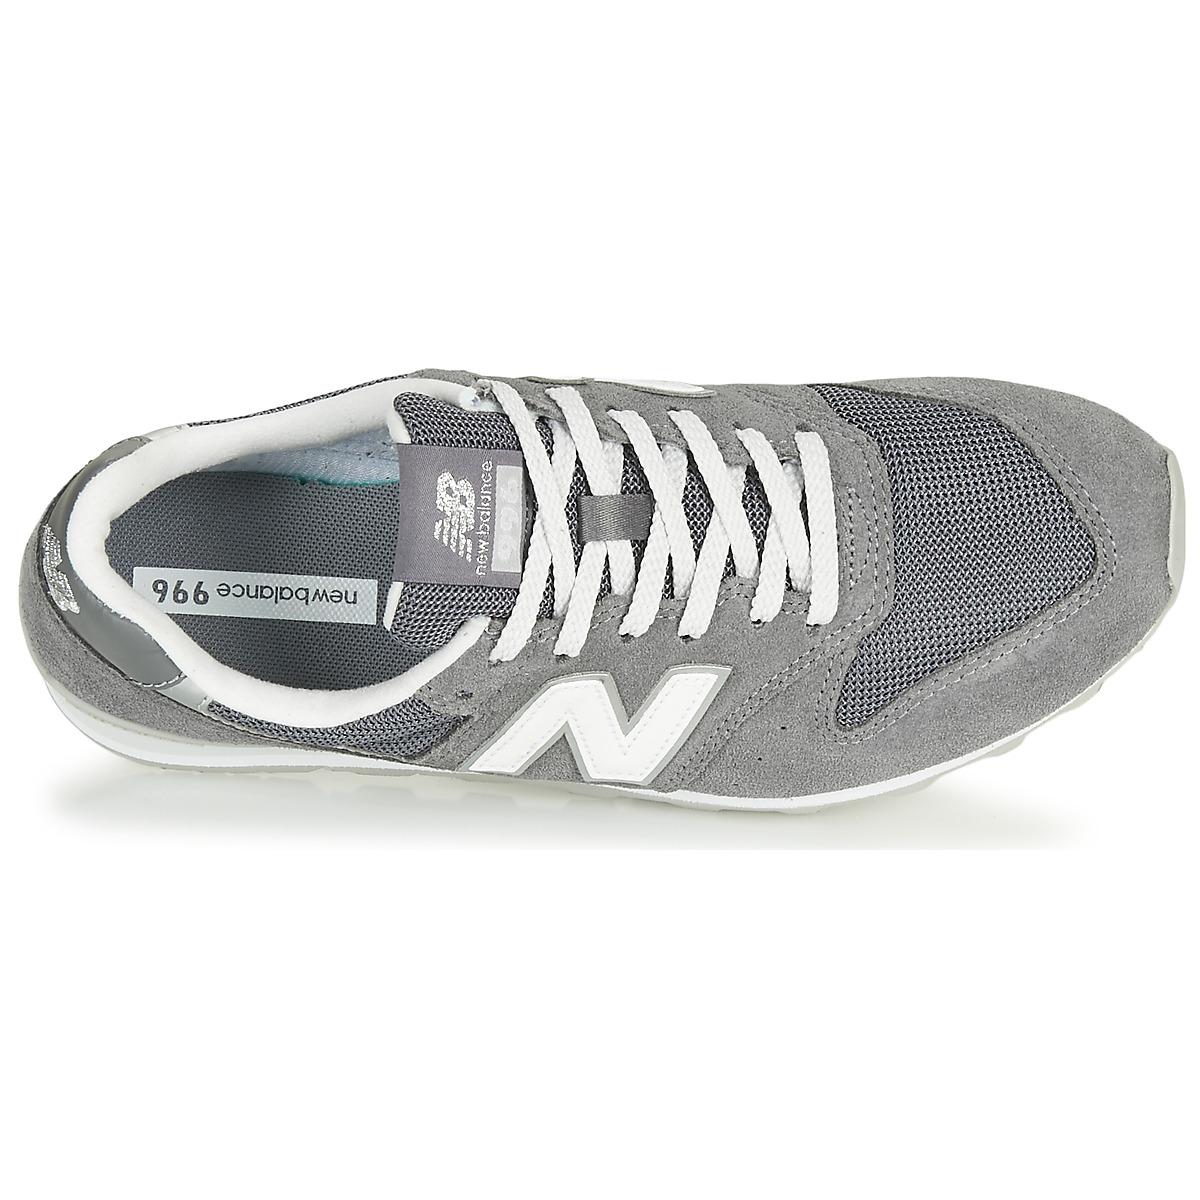 New Balance 966 Womens Online Hotsell, UP TO 65% OFF